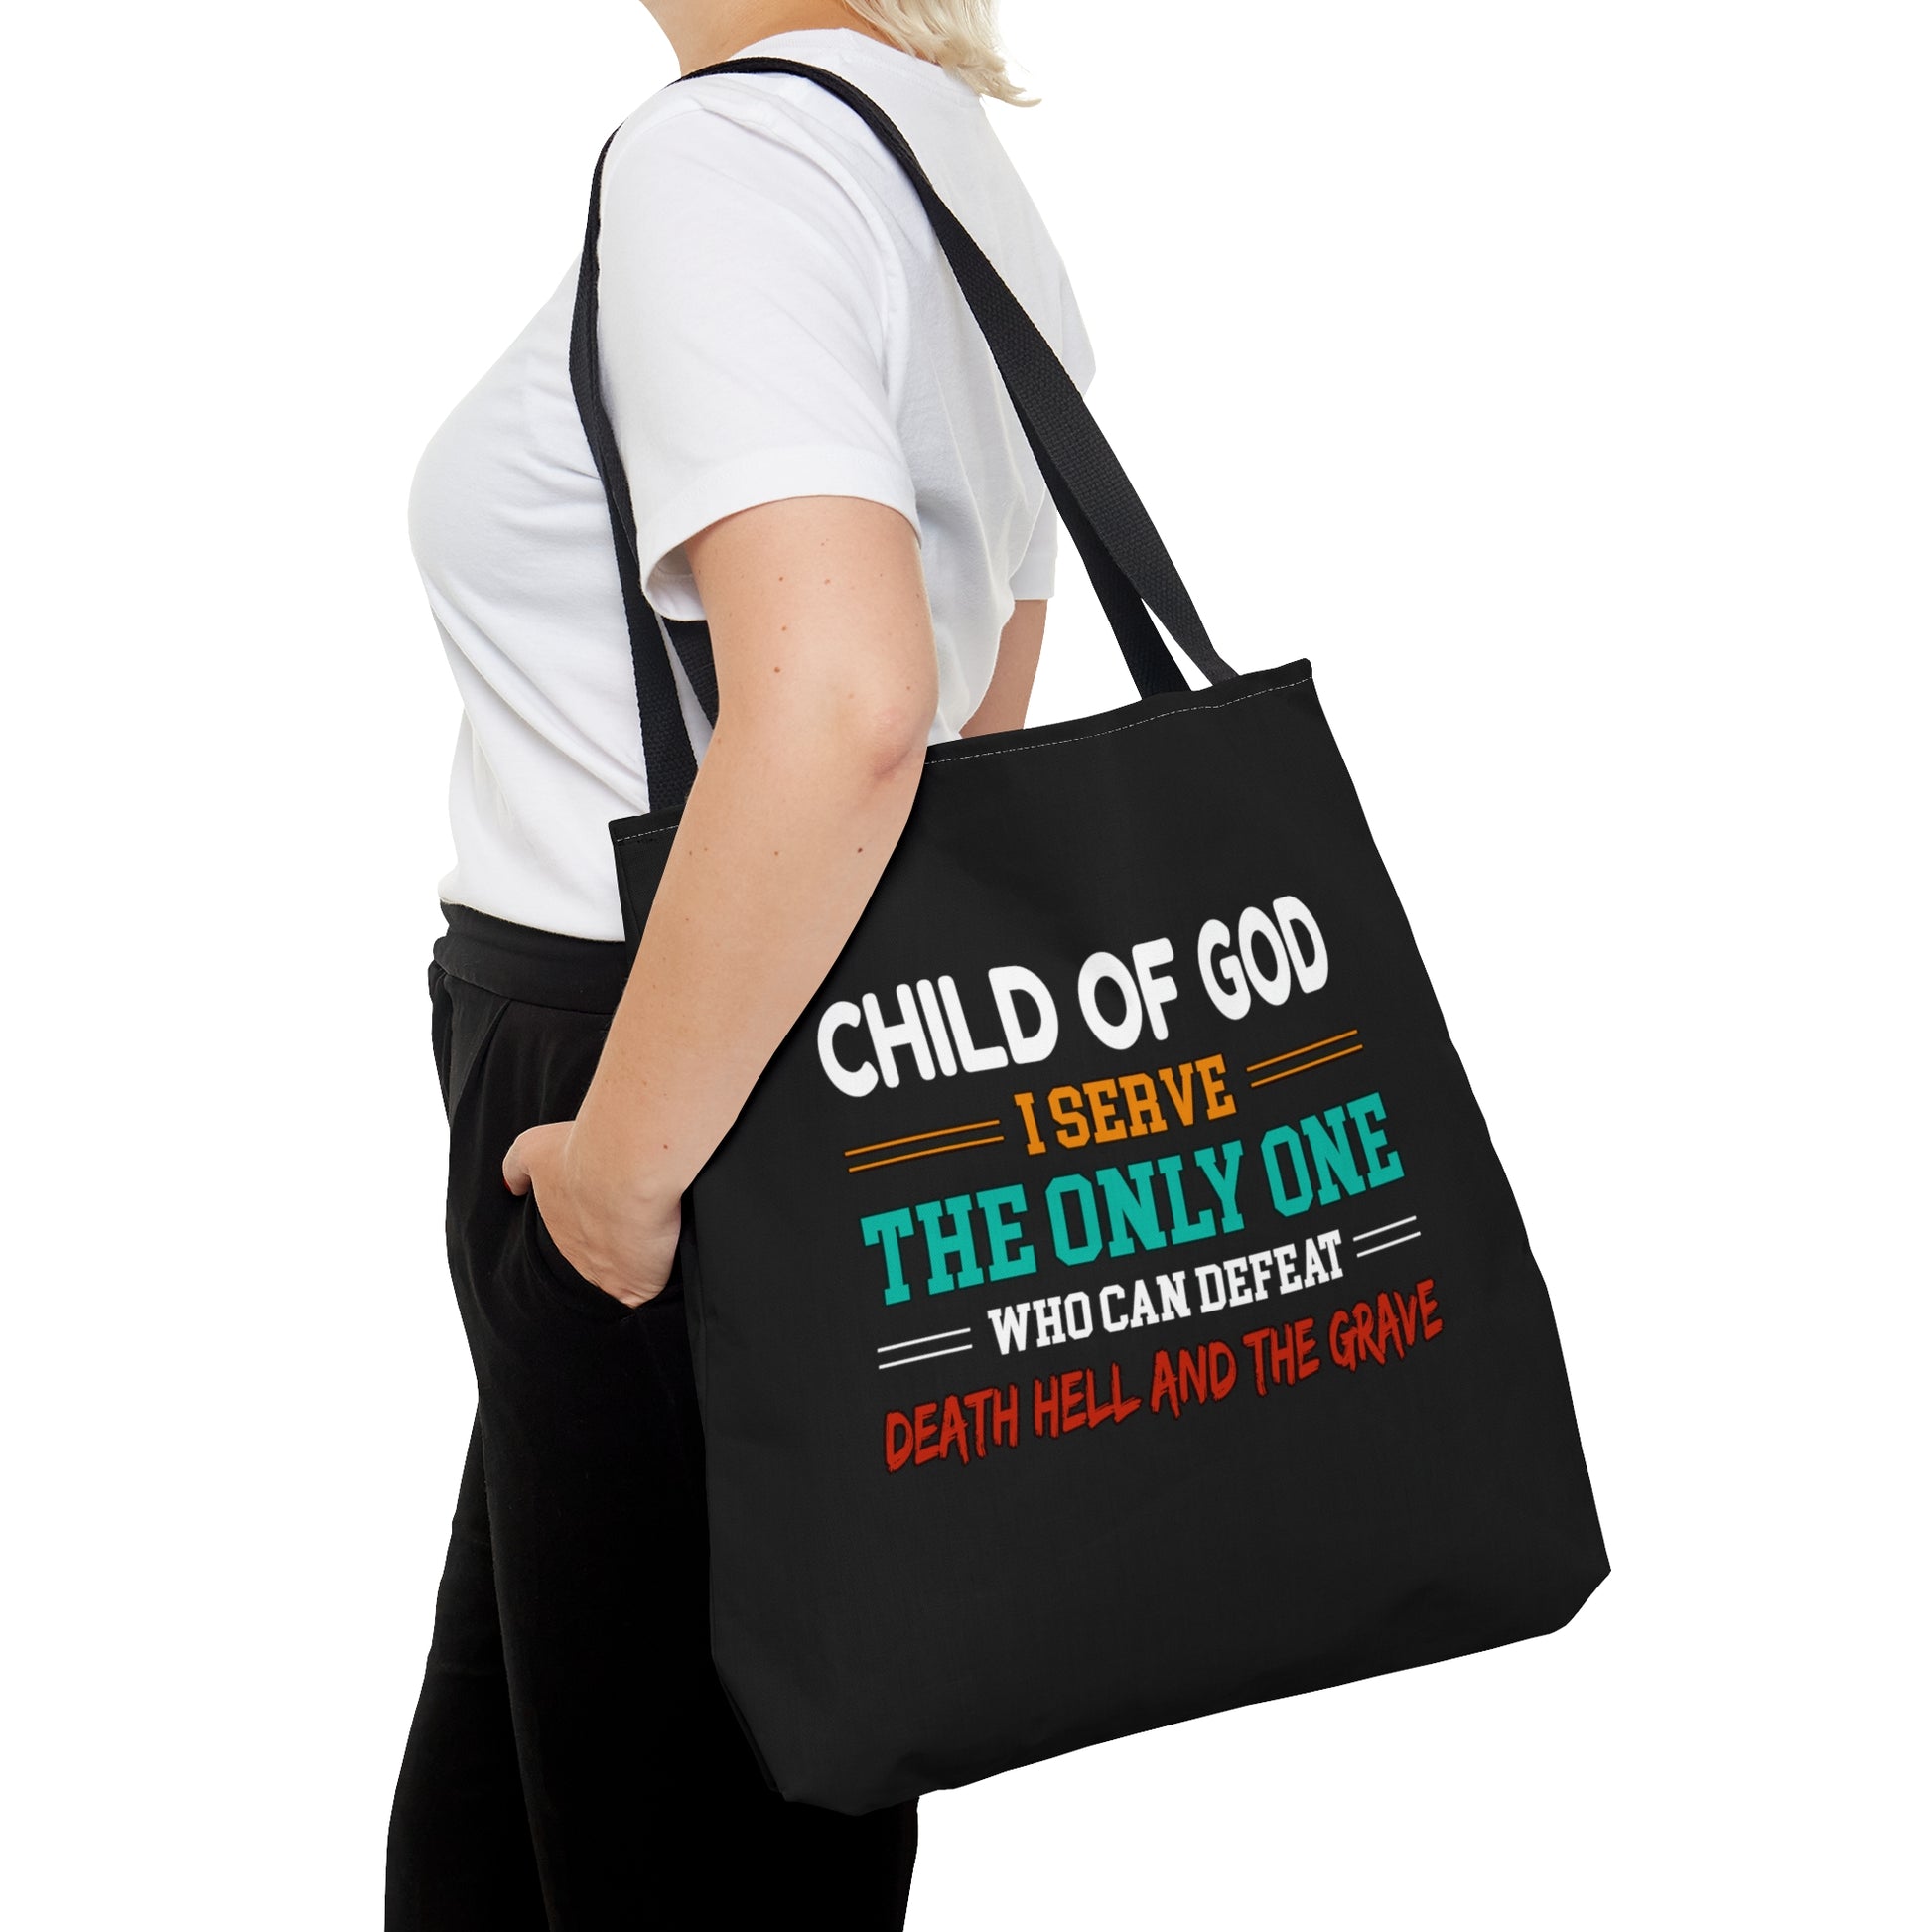 Child Of God I Serve The Only One Who Can Defeat Death Hell And The Grave Christian Tote Bag Printify